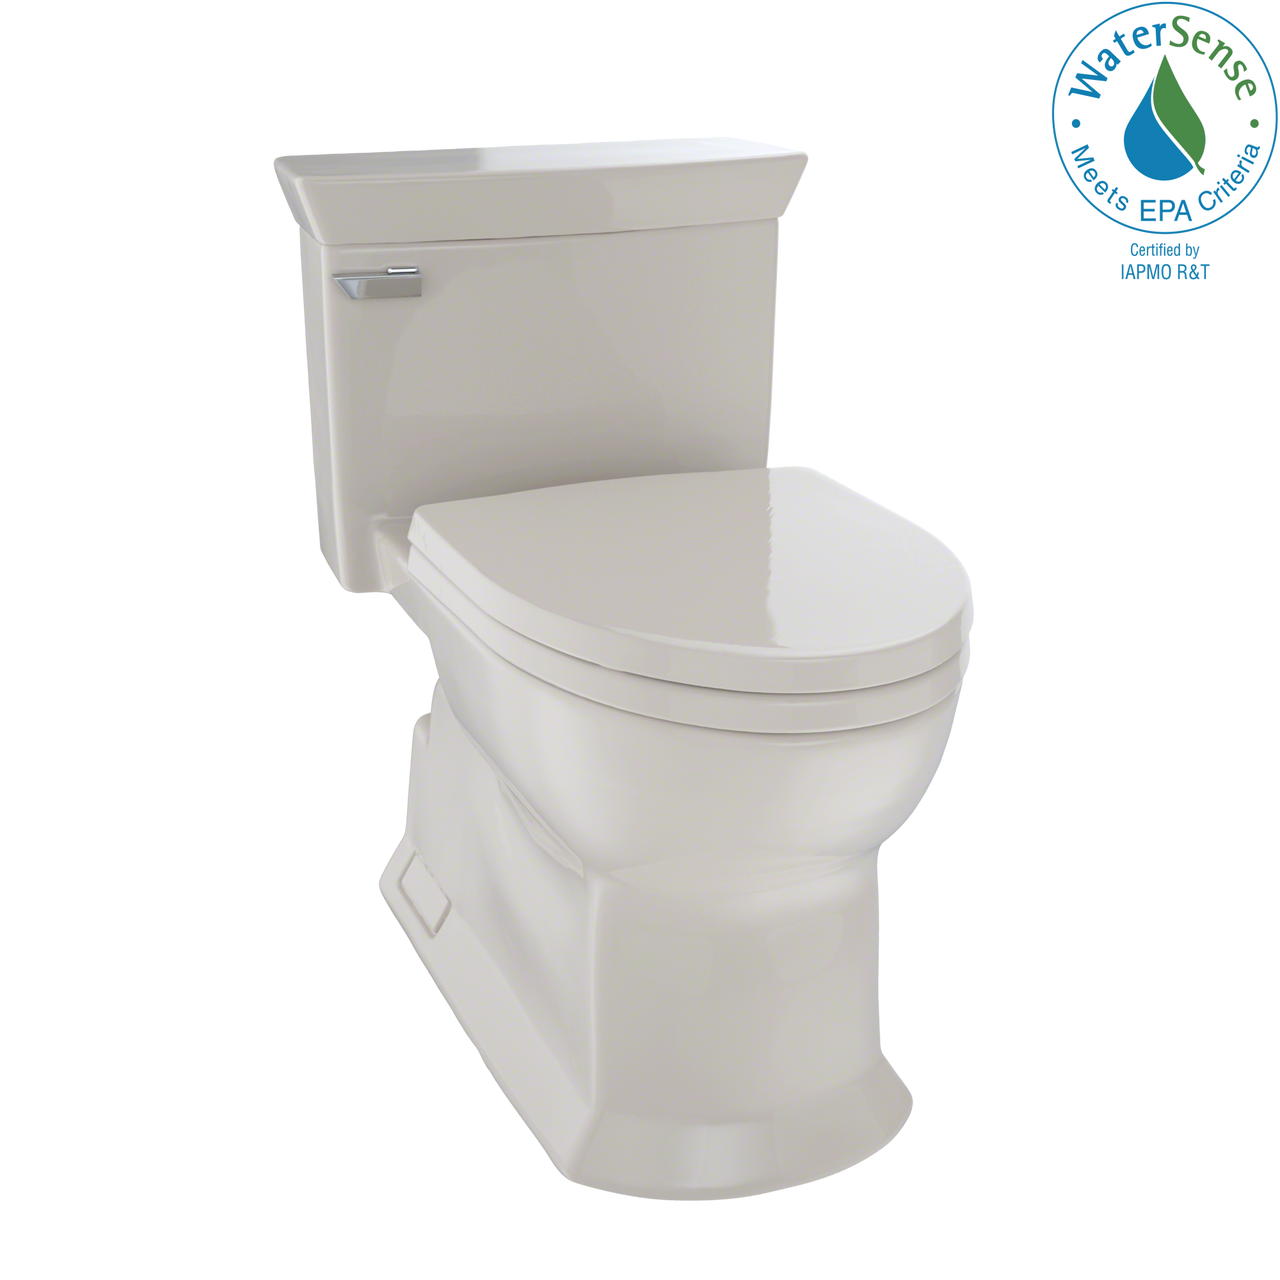 TOTO Eco Soir√©e One Piece Elongated 1.28 GPF Universal Height Skirted Toilet with CeFiONtect,  - MS964214CEFG#03 - BNGBath